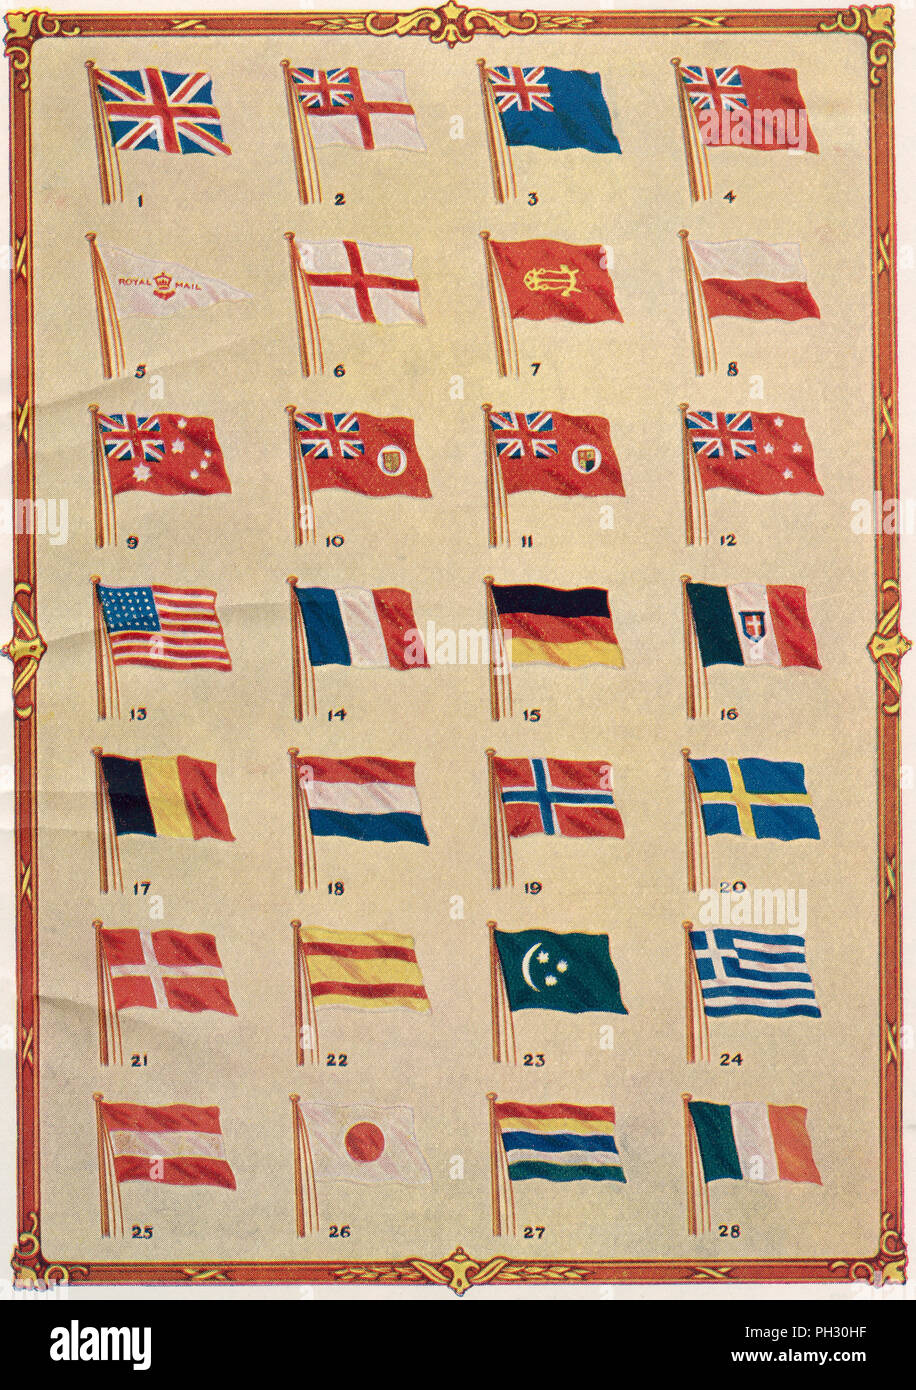 Ensigns and National Merchant Flags.  1. Union Jack 2. White Ensign (Royal Navy) 3. Blue Ensign (Royal Navy Reserve) 4. Red Ensign (Mercantile Marine) 5. Royal Mail 6. St. George's Cross (flown by Admiralty) 7. Admiralty 8. Pilot on Board 9. Australia 10. Canada 11. South Africa 12. New Zealand 13. United States 14. France 15. Germany 16. Italy 17. Belgium 18. Holland 19. Norway 20. Sweden 21. Denmark 22. Spain 23. Yugoslavia 24. Greece 25. Poland 26. Japan 27. China 28. Siam.  From The Book of Ships, published c.1920. Stock Photo